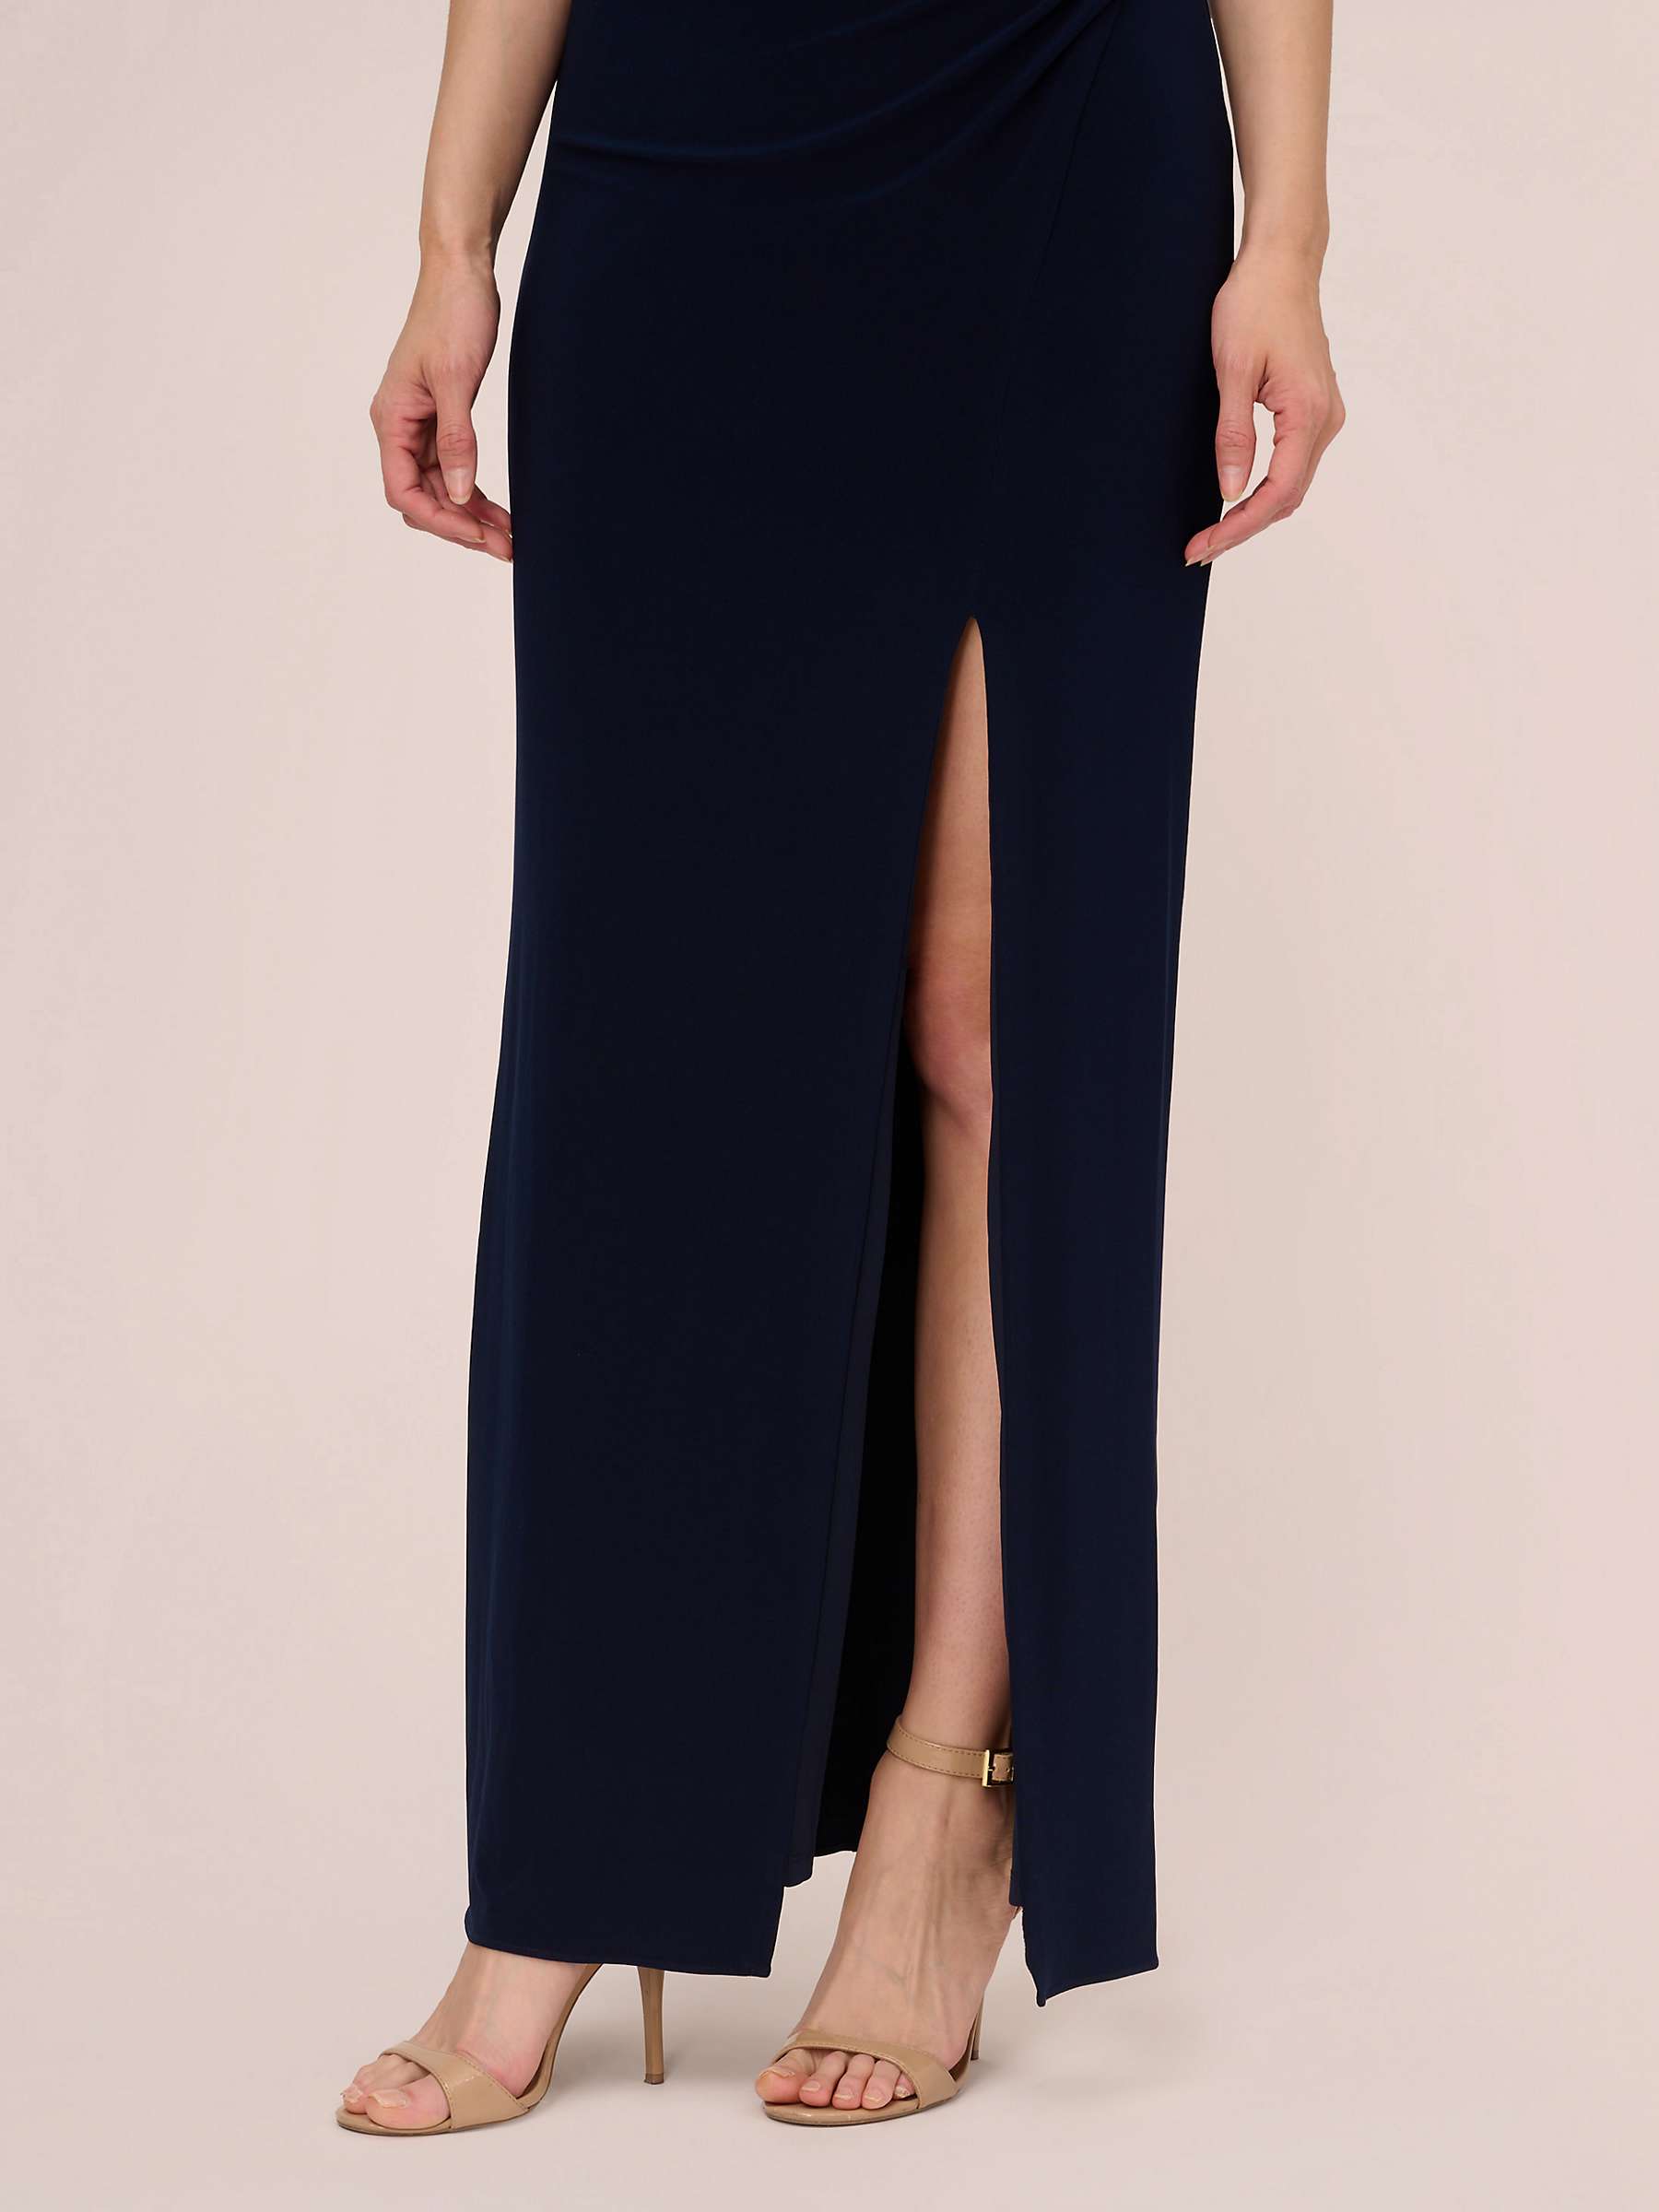 Buy Adrianna Papell Embellished Back Jersey Dress, Midnight Online at johnlewis.com